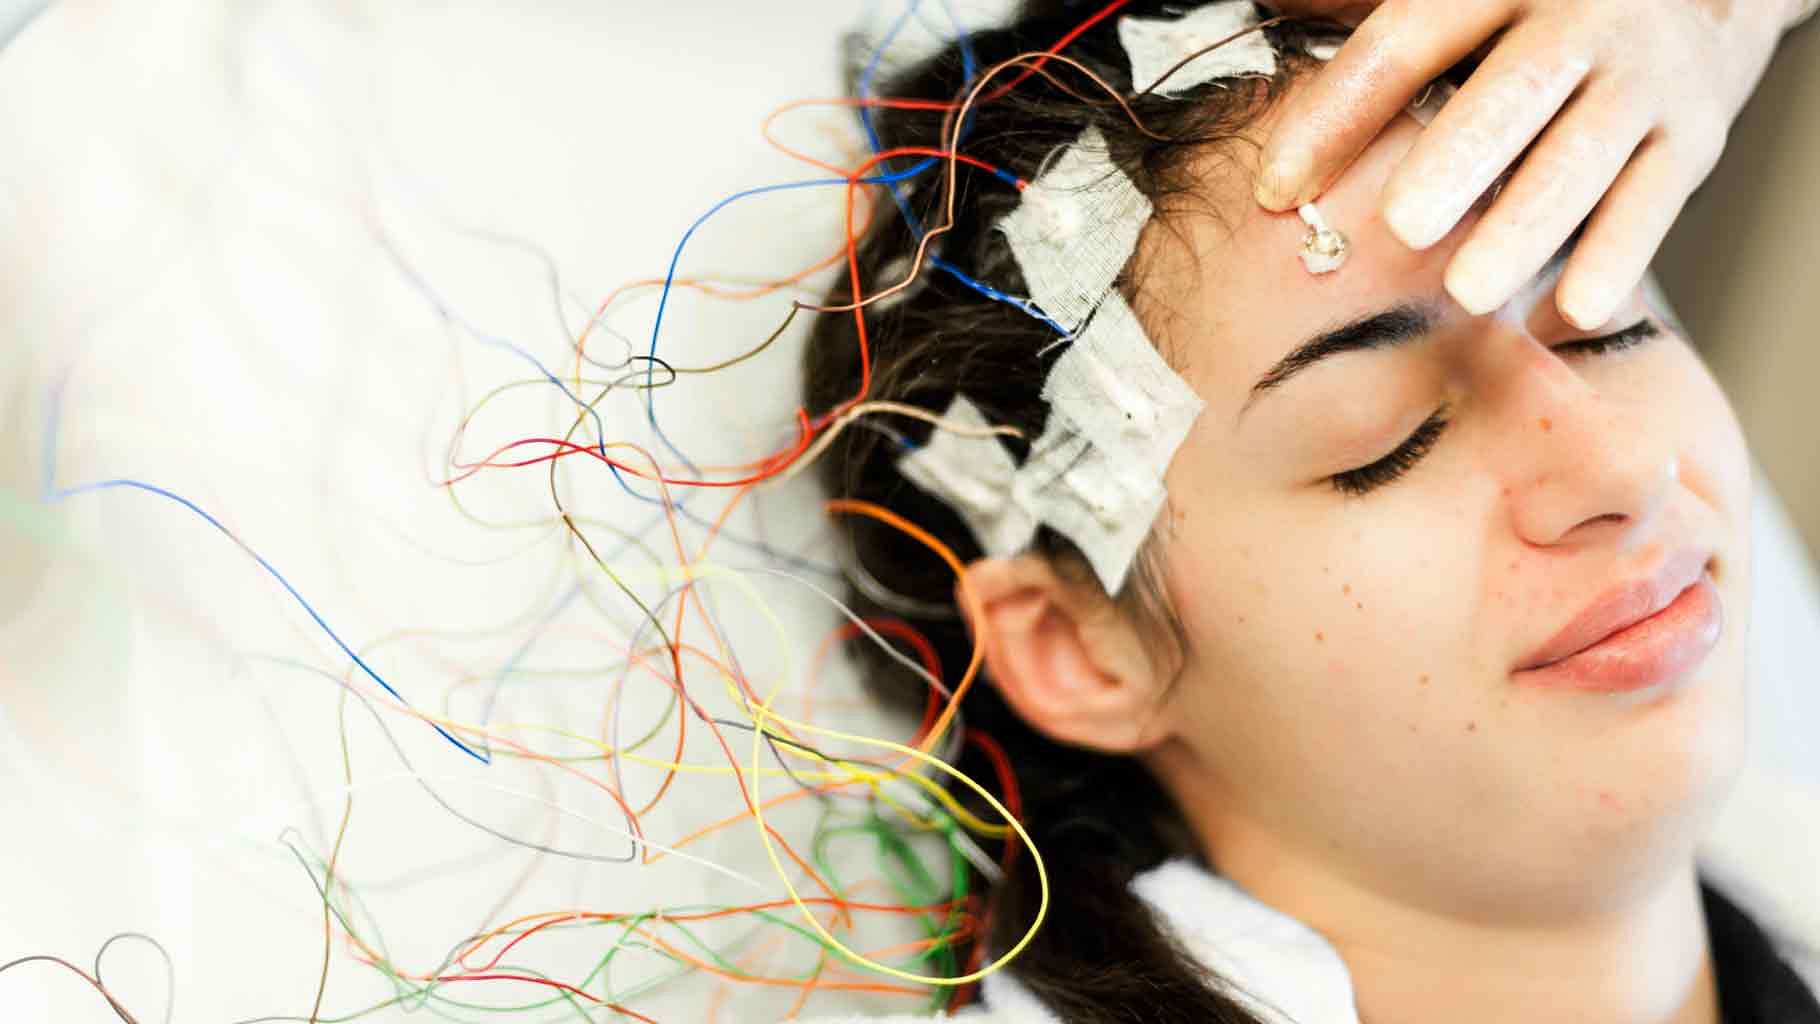 These devices can be extremely effective at preventing debilitating tremors or seizures in patients with a variety of neurological conditions.